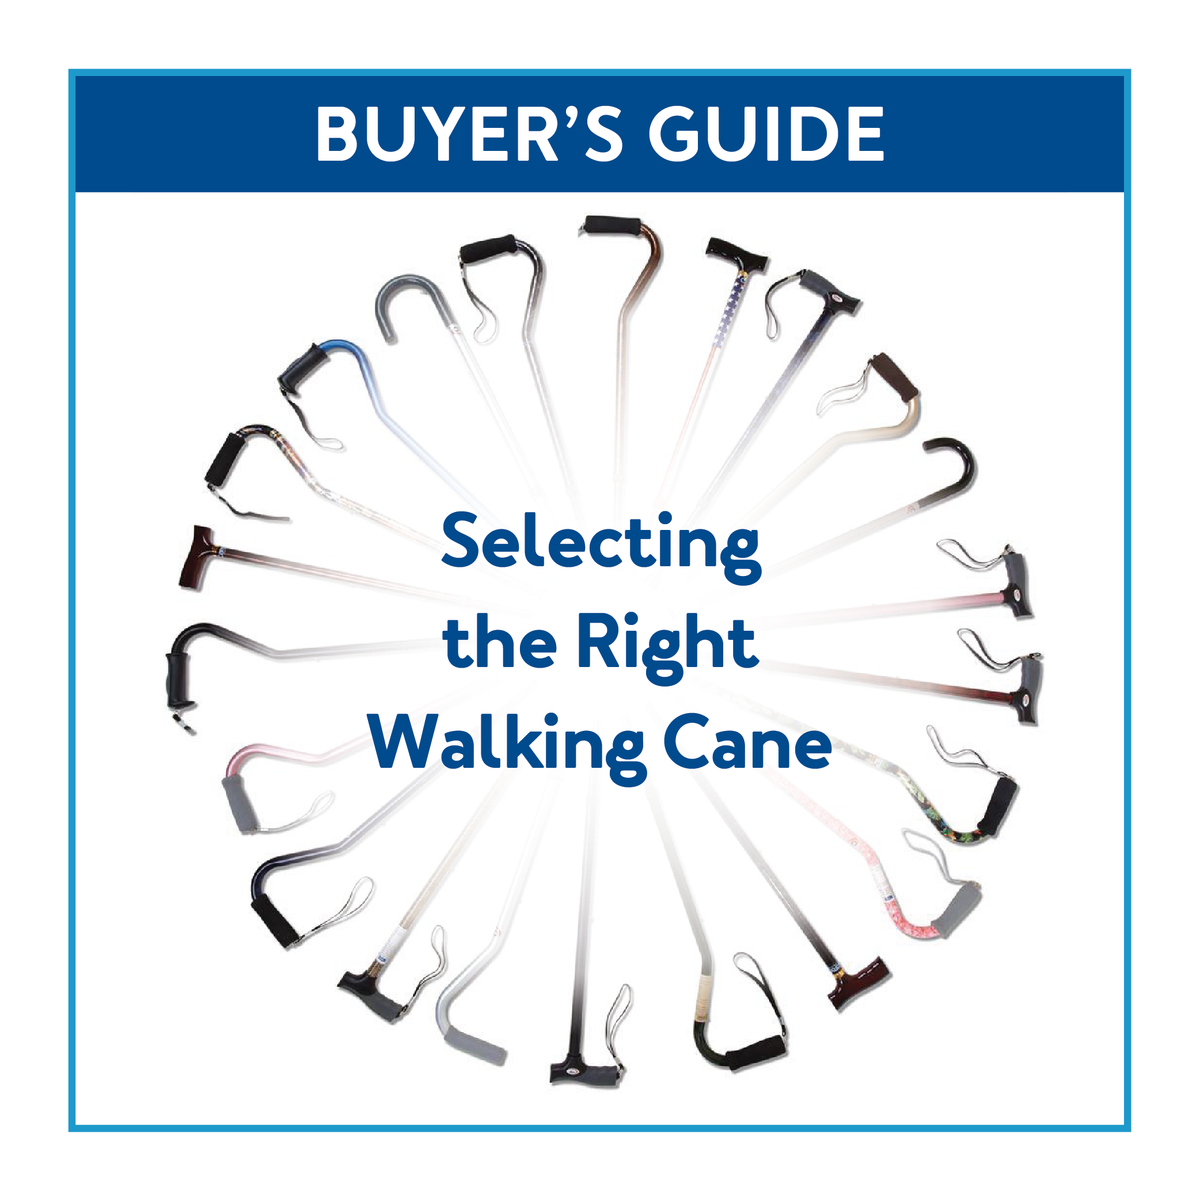 Walking canes circle, blue border, text: Buyer’s Guide for Selecting Right Cane